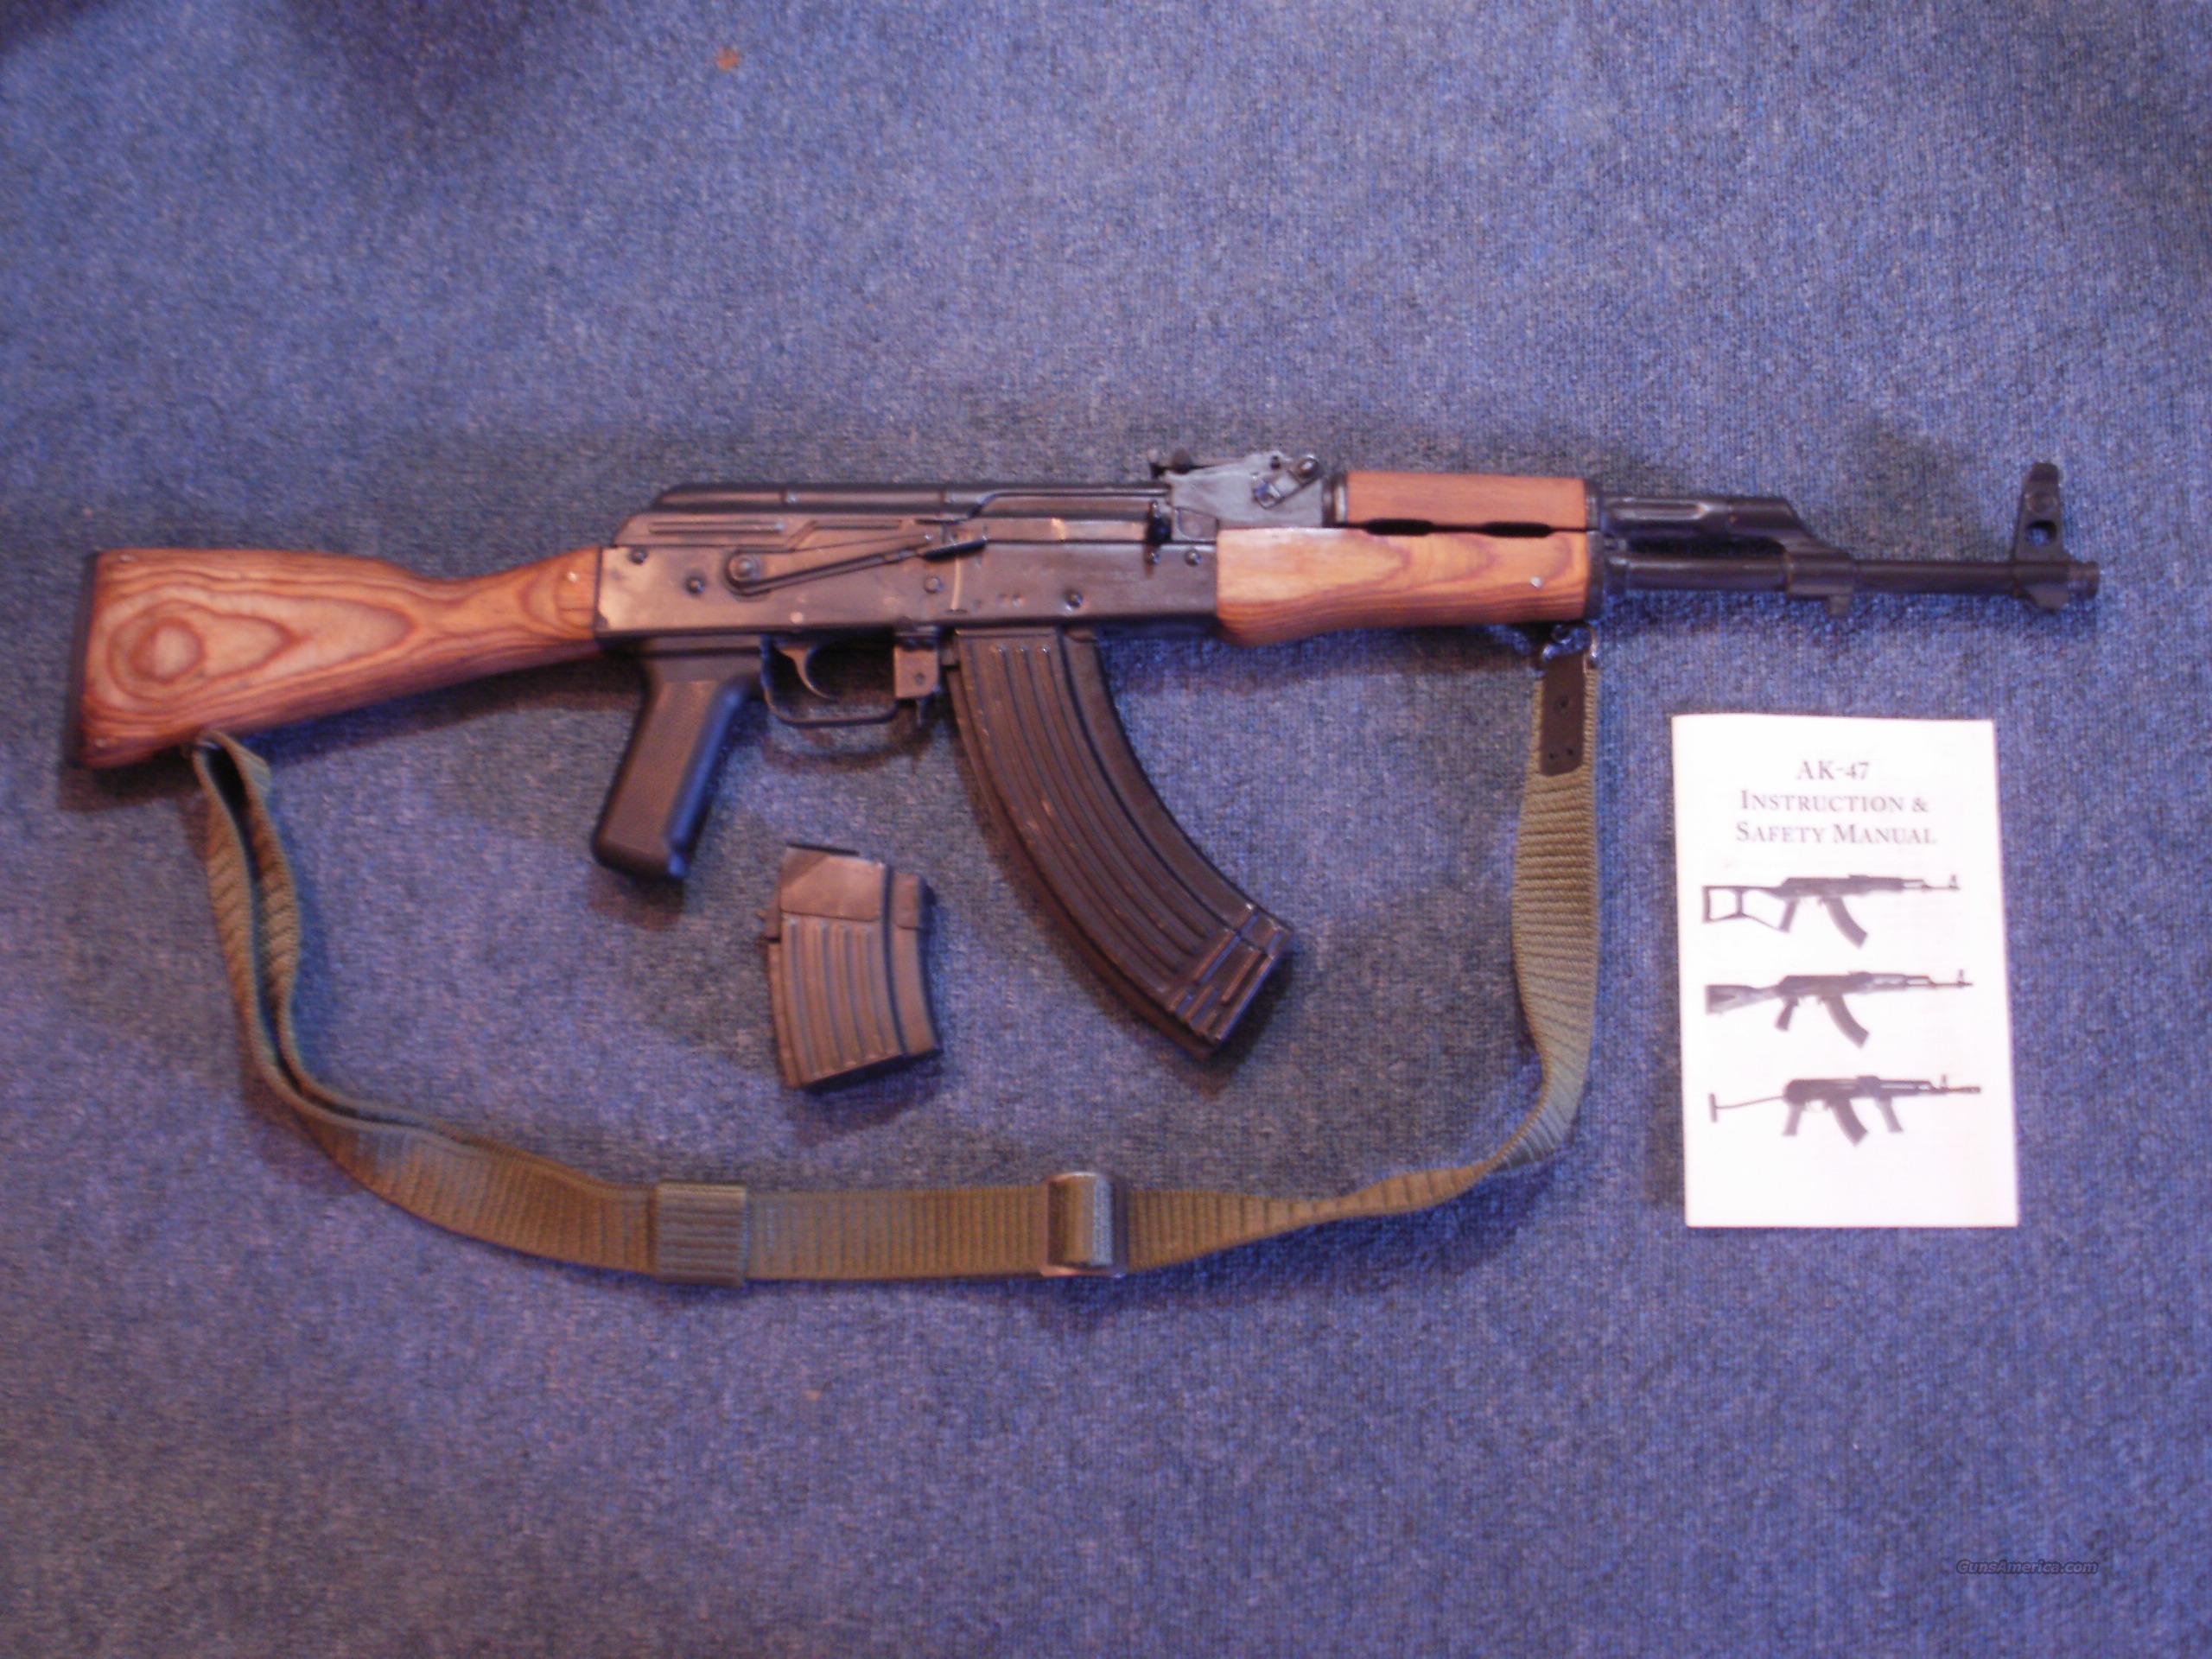 I do realize that WASR's are low end AK's, but it's what I c...